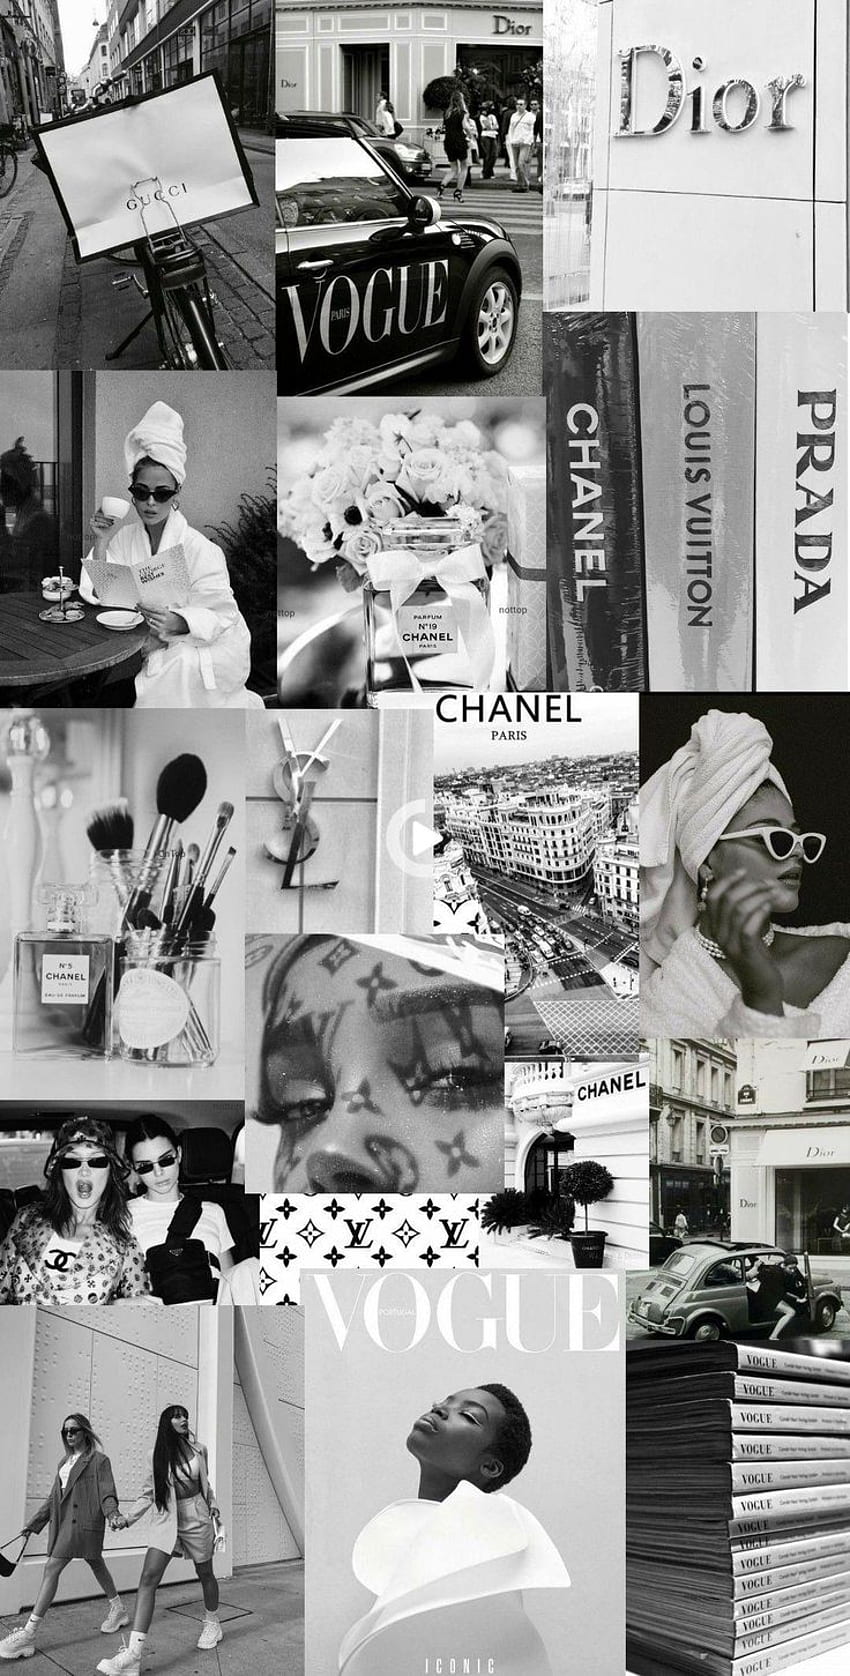 A collage of chanel, dior and other fashion brands - Fashion